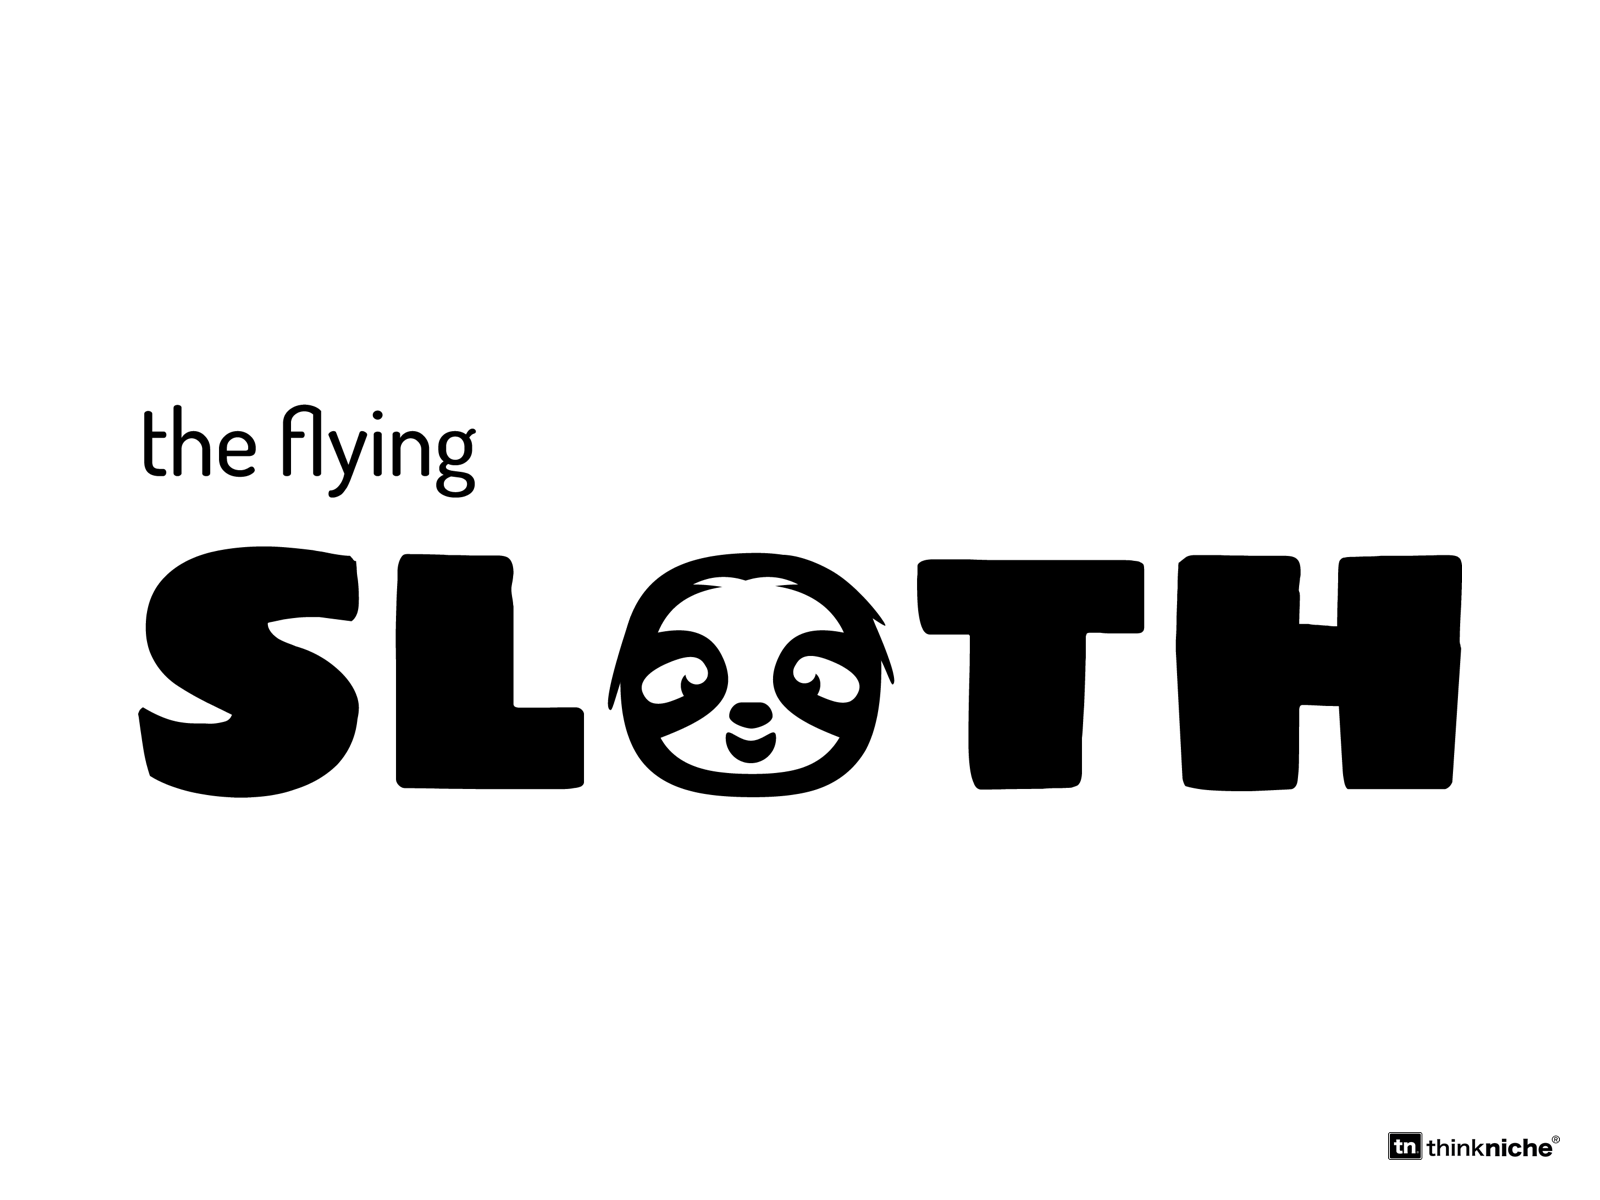 The Flying Sloth - logo and branding by Nicole Corbin on Dribbble